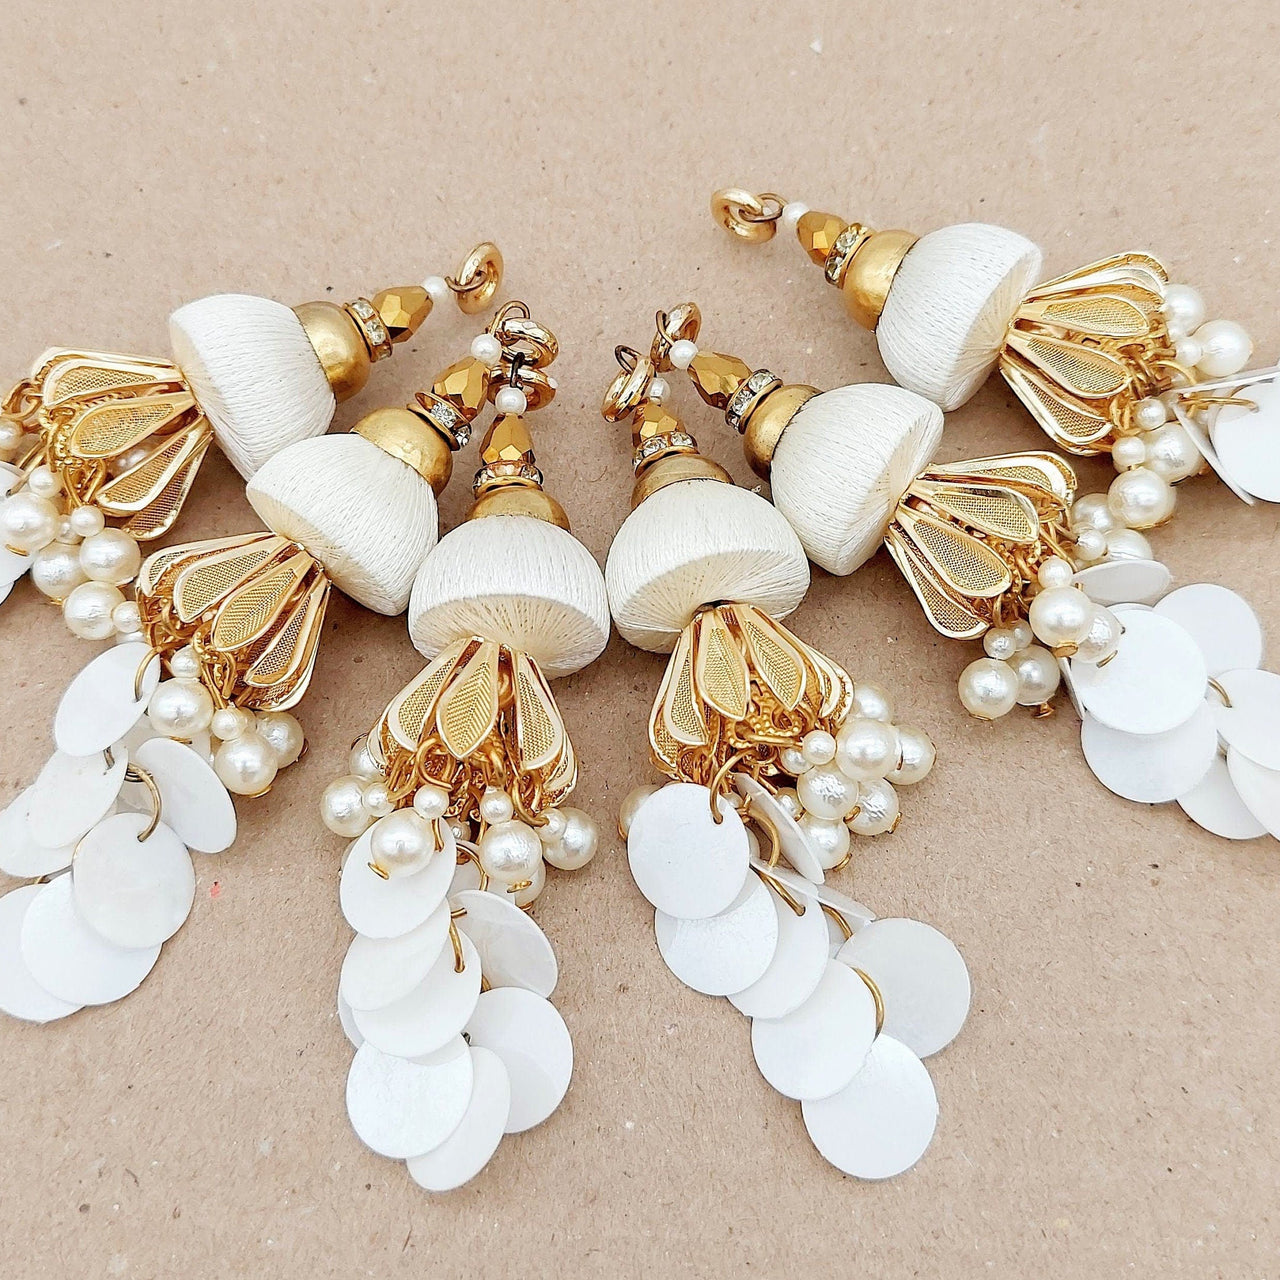 Handcrafted White And Gold Tassels Latkan In White Sequins and Pearl Beads, Indian Latkans, Sewing Latkans